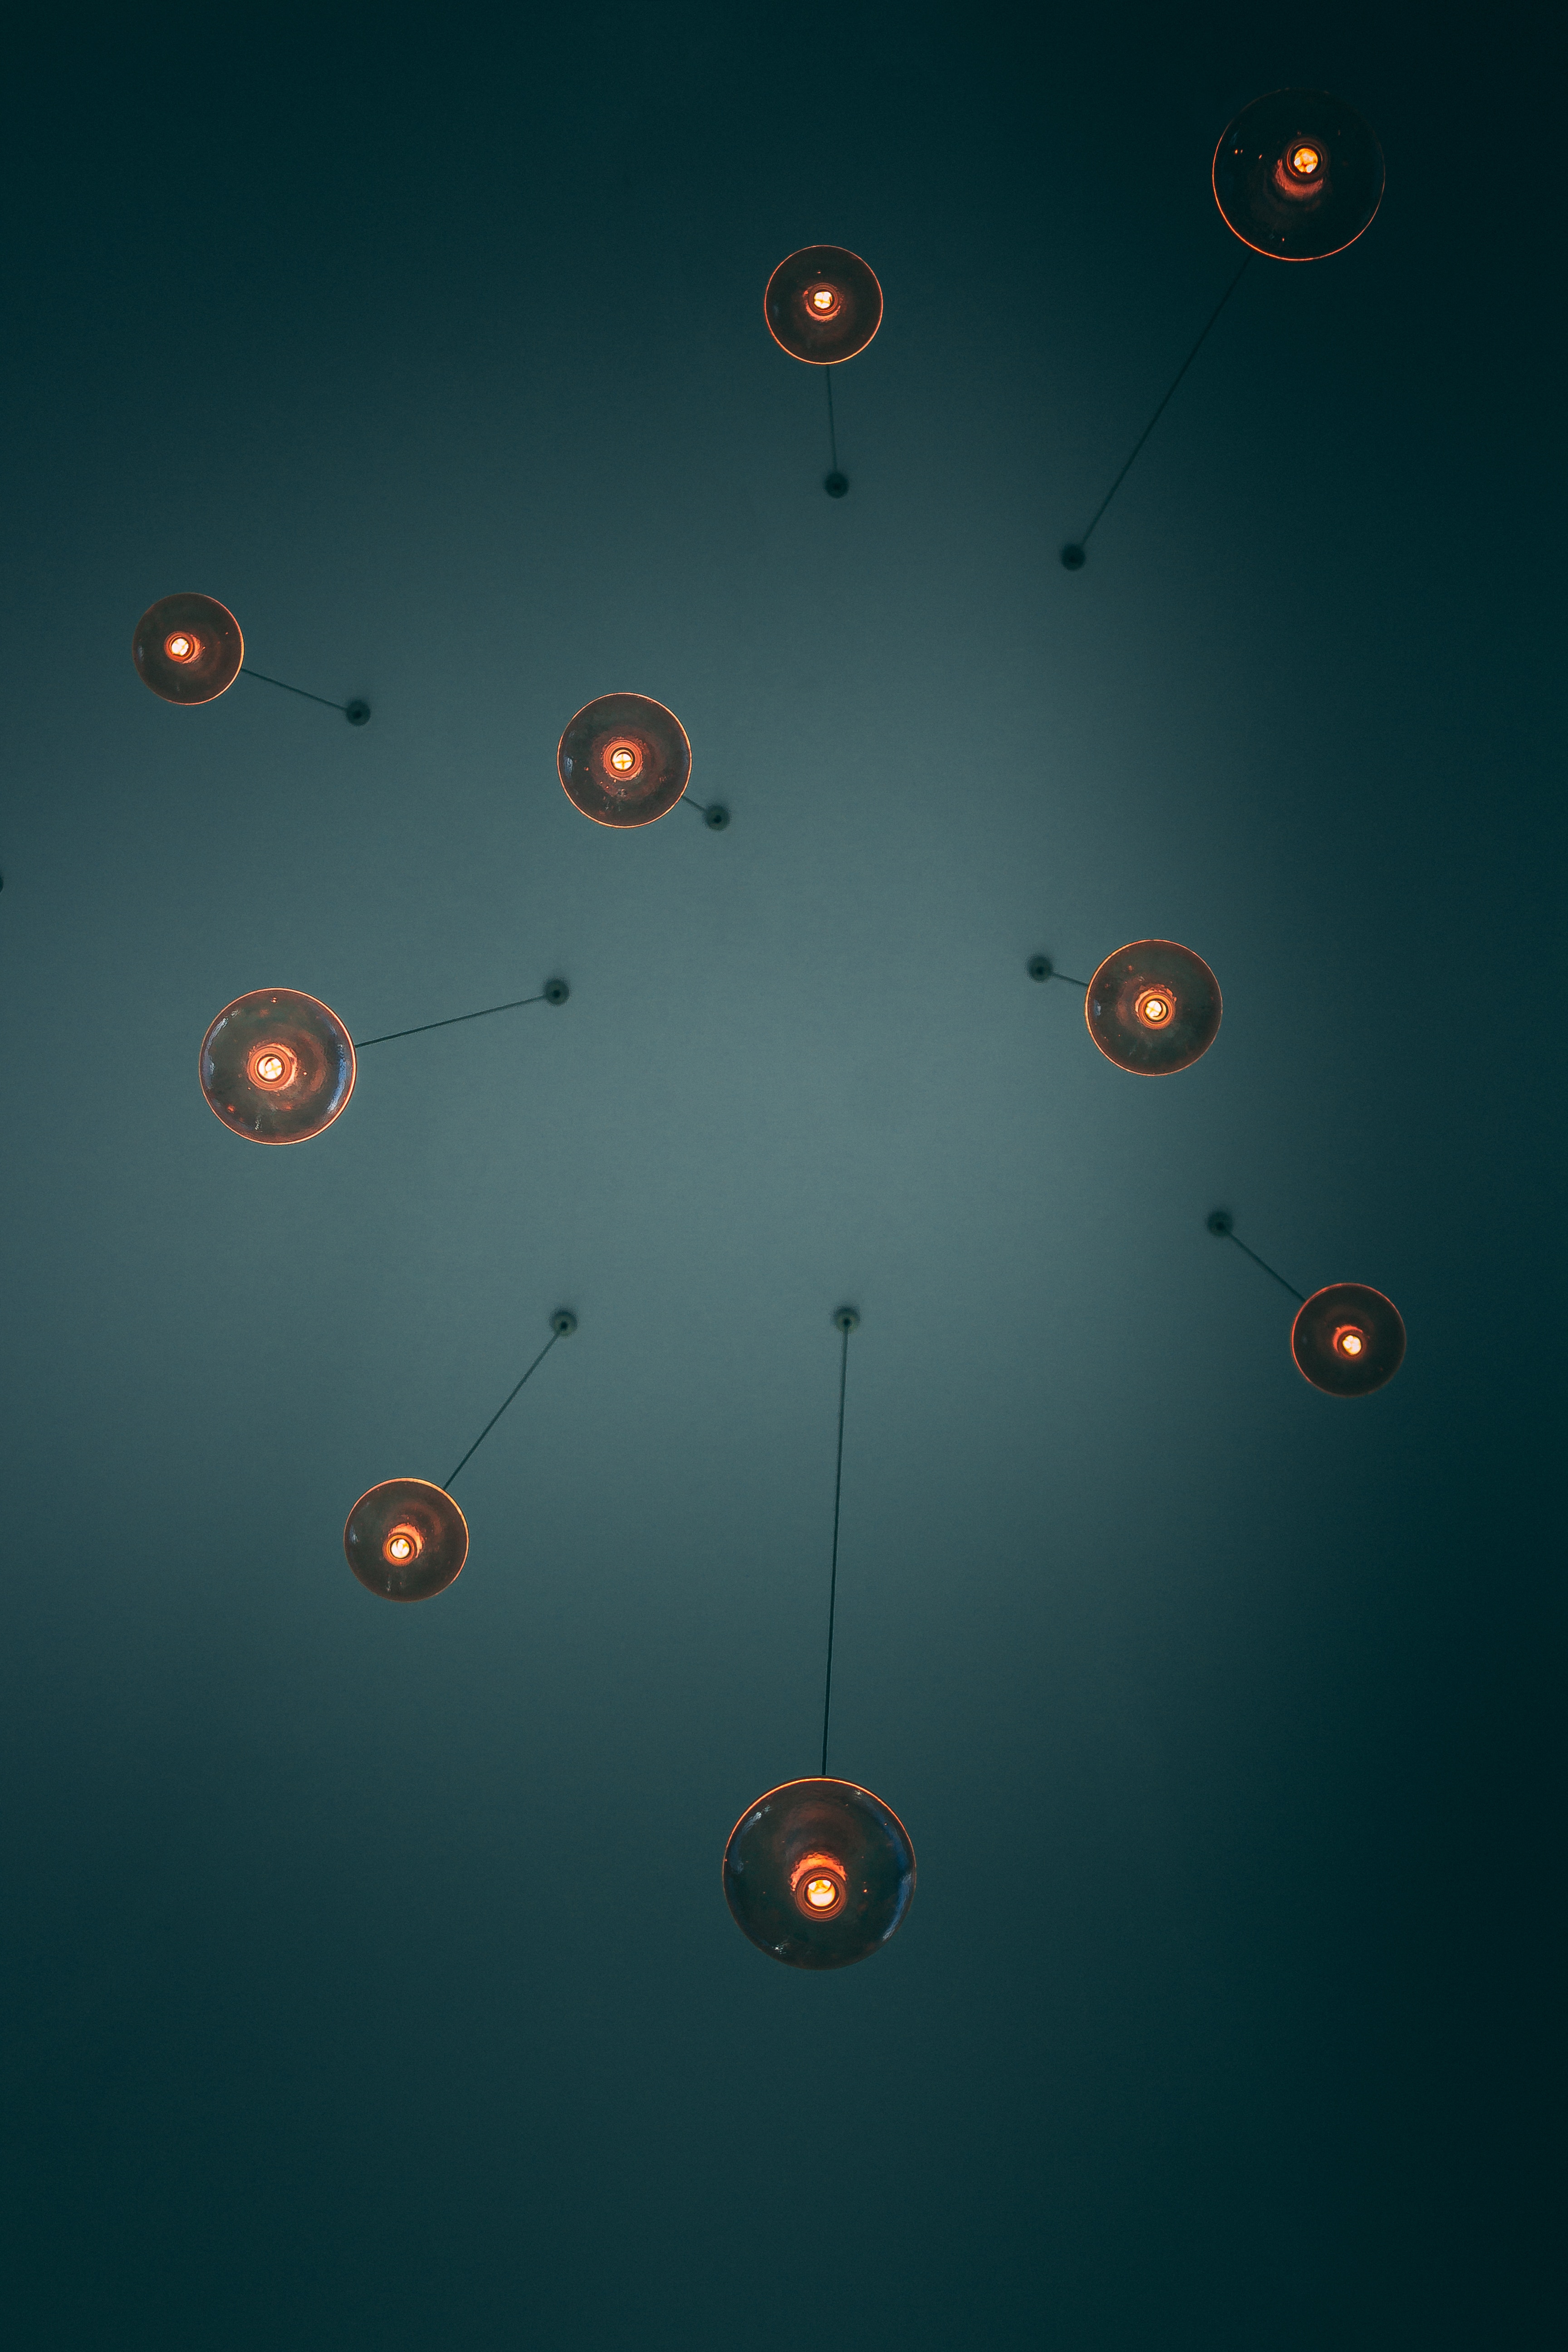 illumination, miscellanea, miscellaneous, lamp, lighting, bottom view, lamps, light bulbs, ceiling cell phone wallpapers